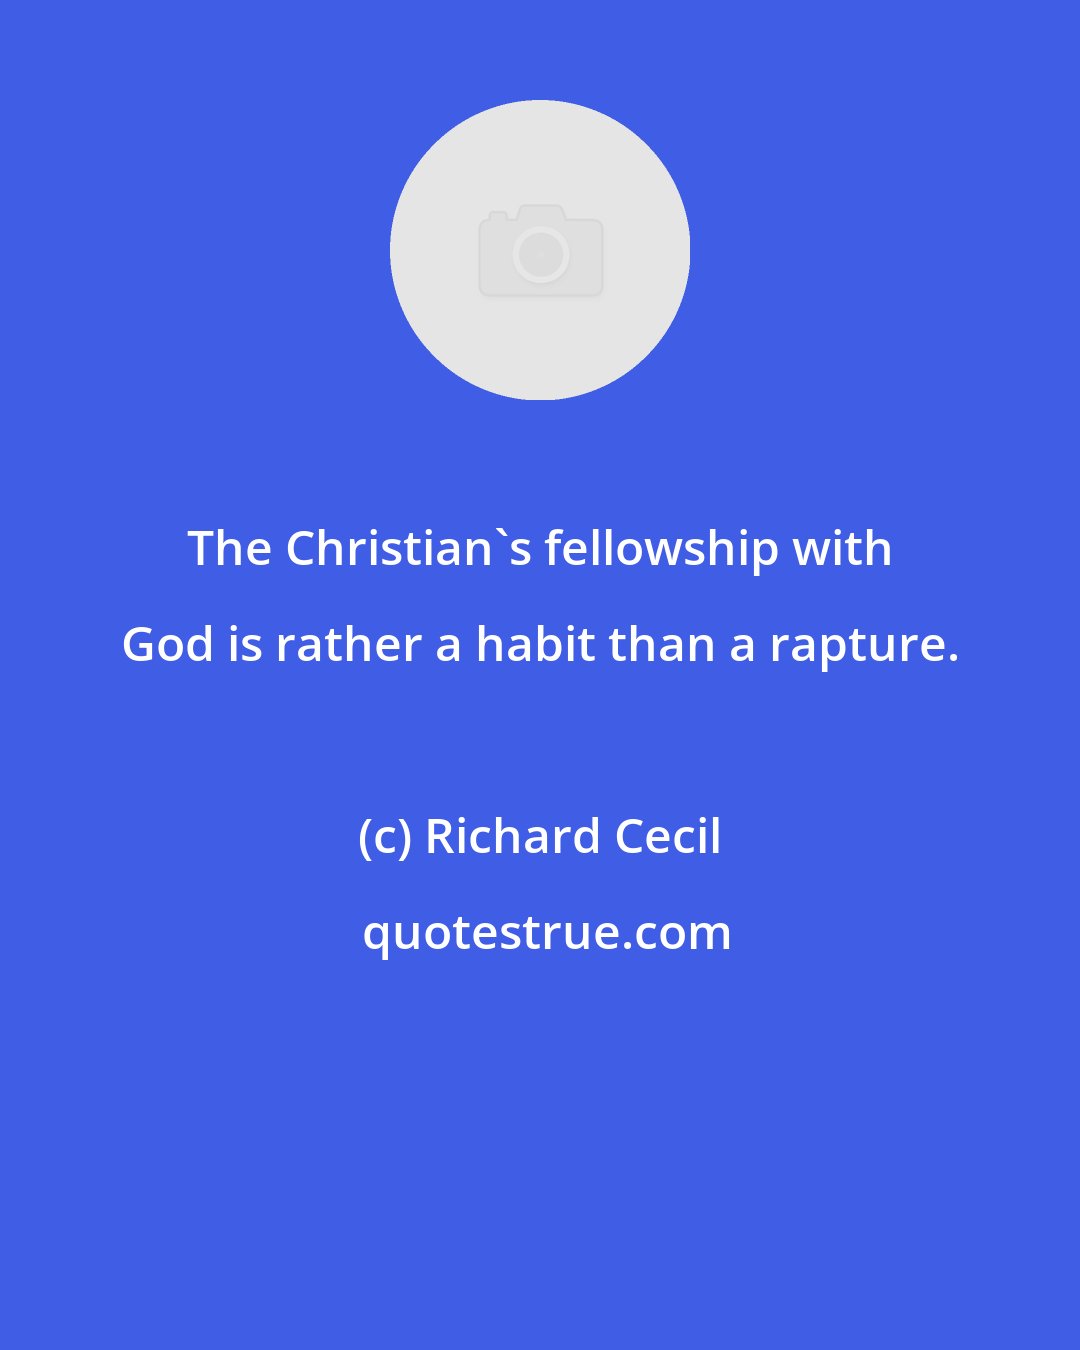 Richard Cecil: The Christian's fellowship with God is rather a habit than a rapture.